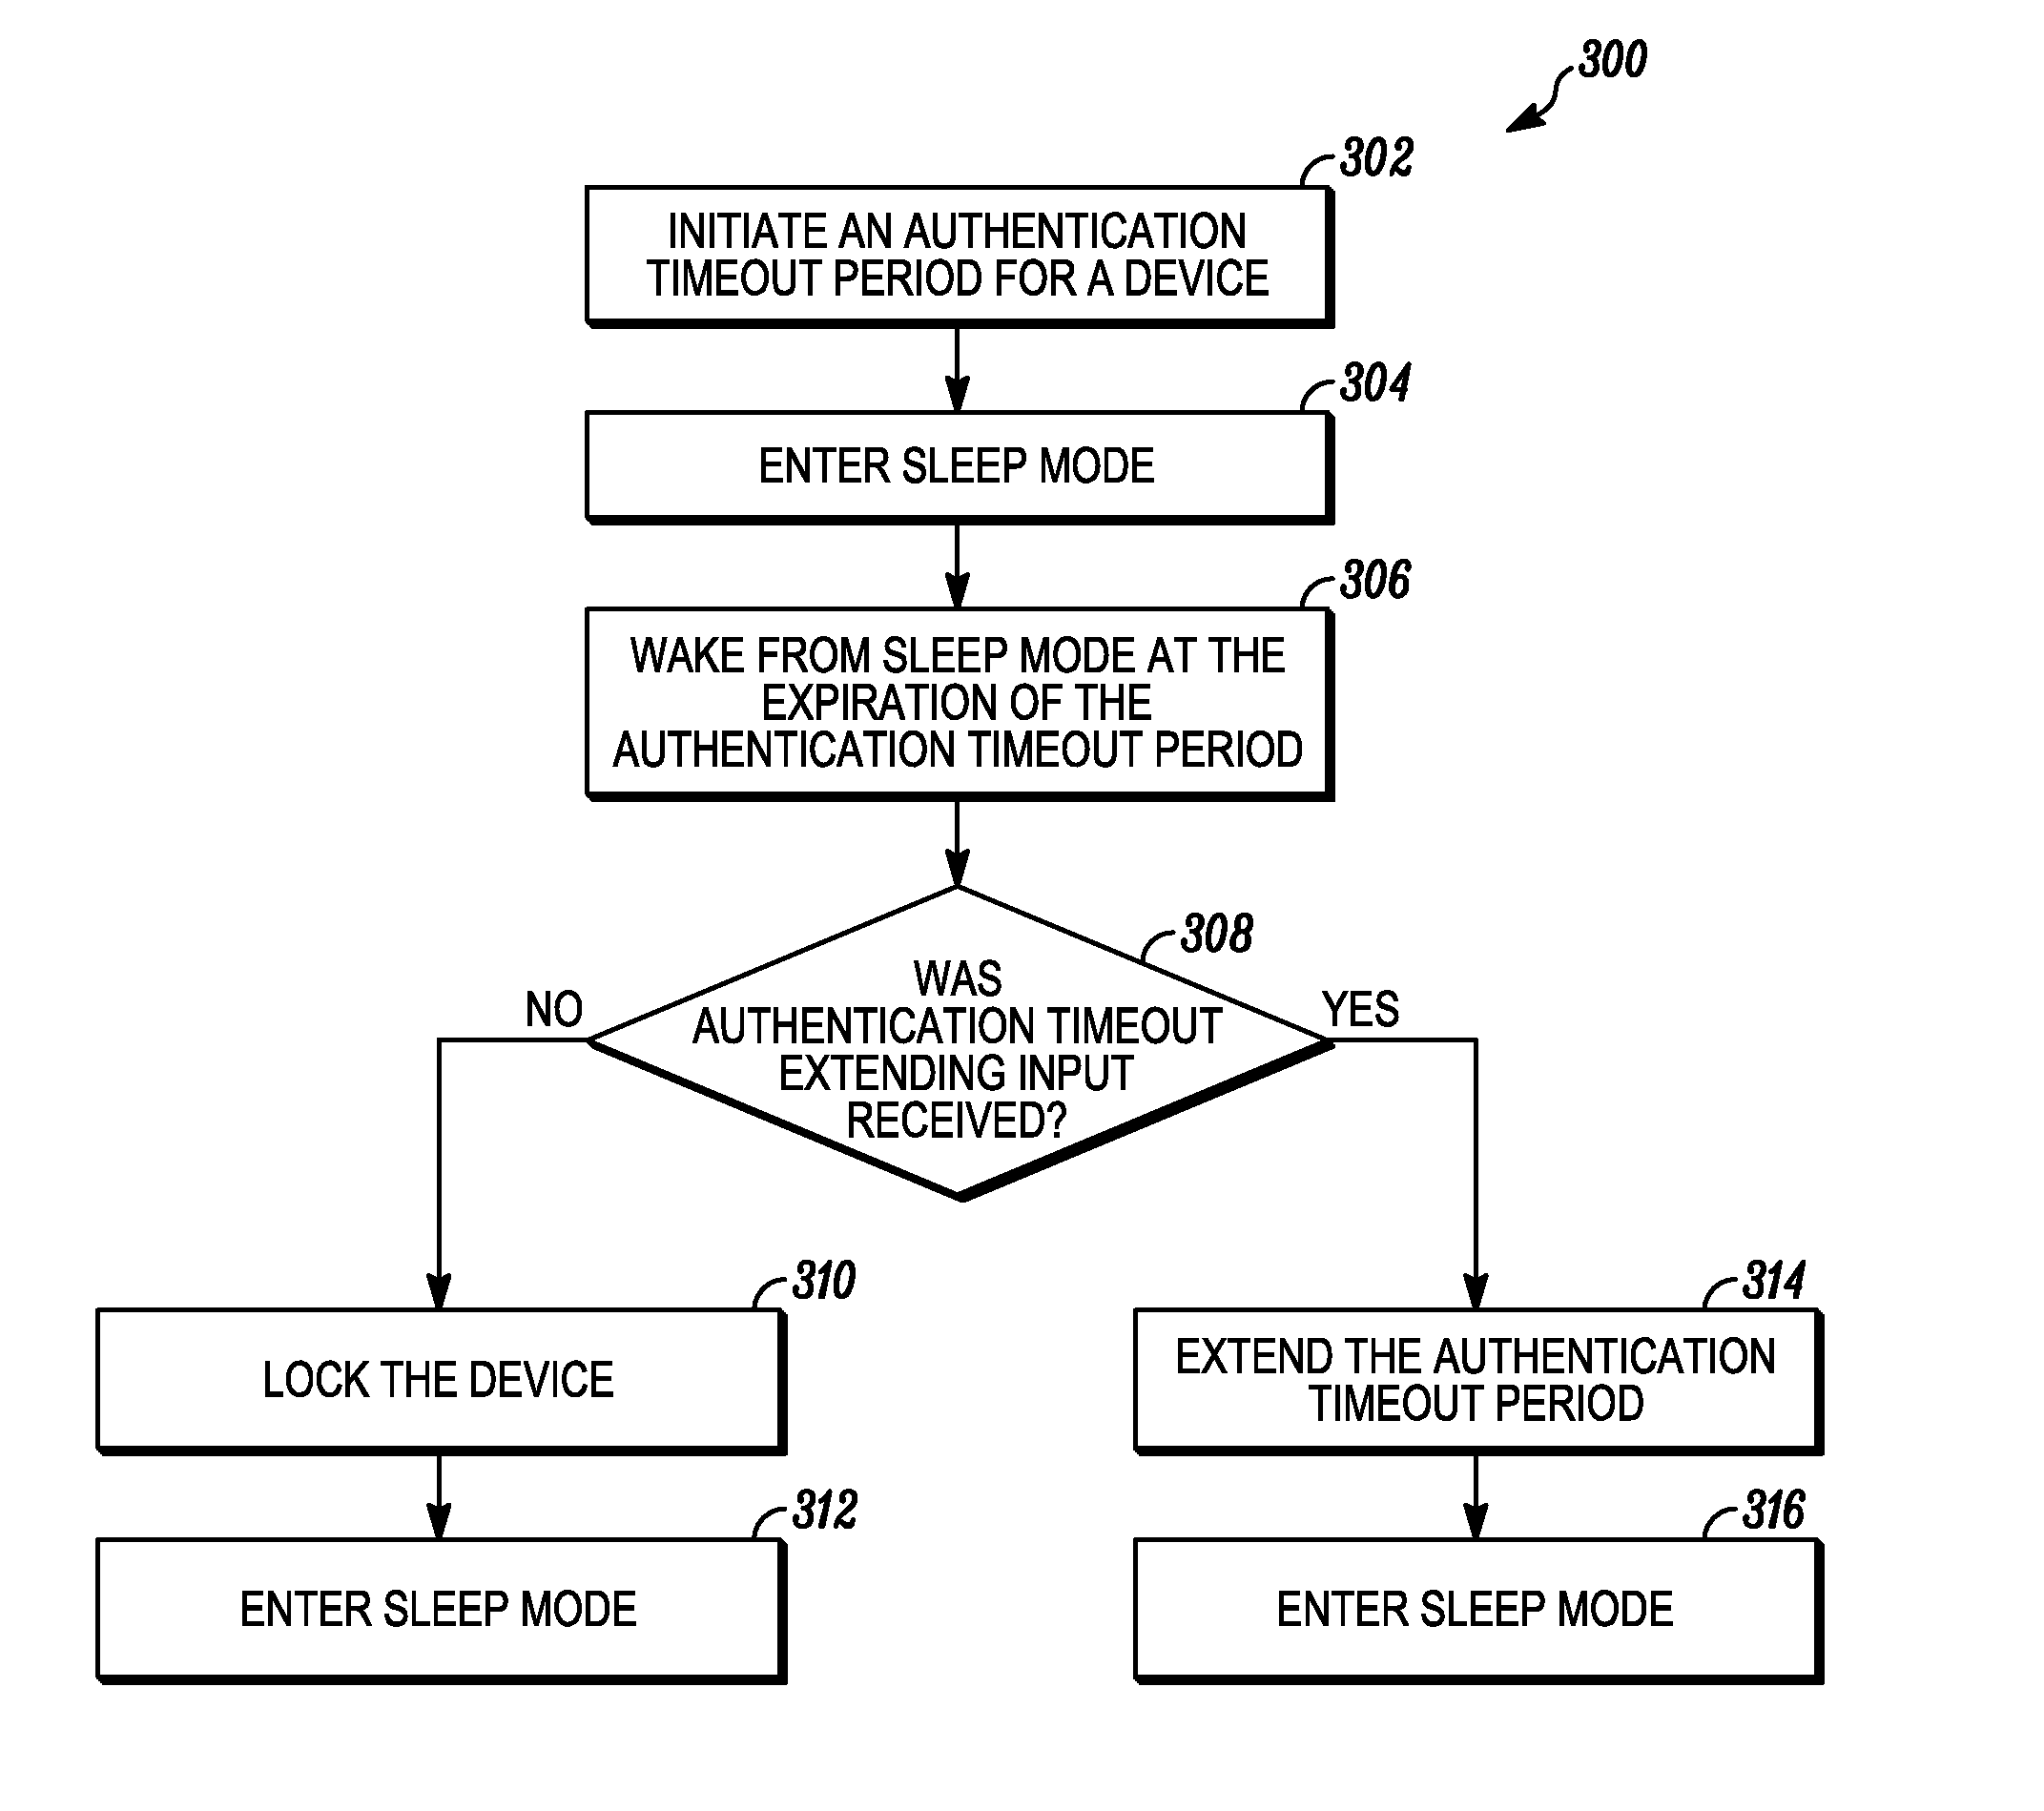 Method and Apparatus for Extending an Authentication Timeout Period